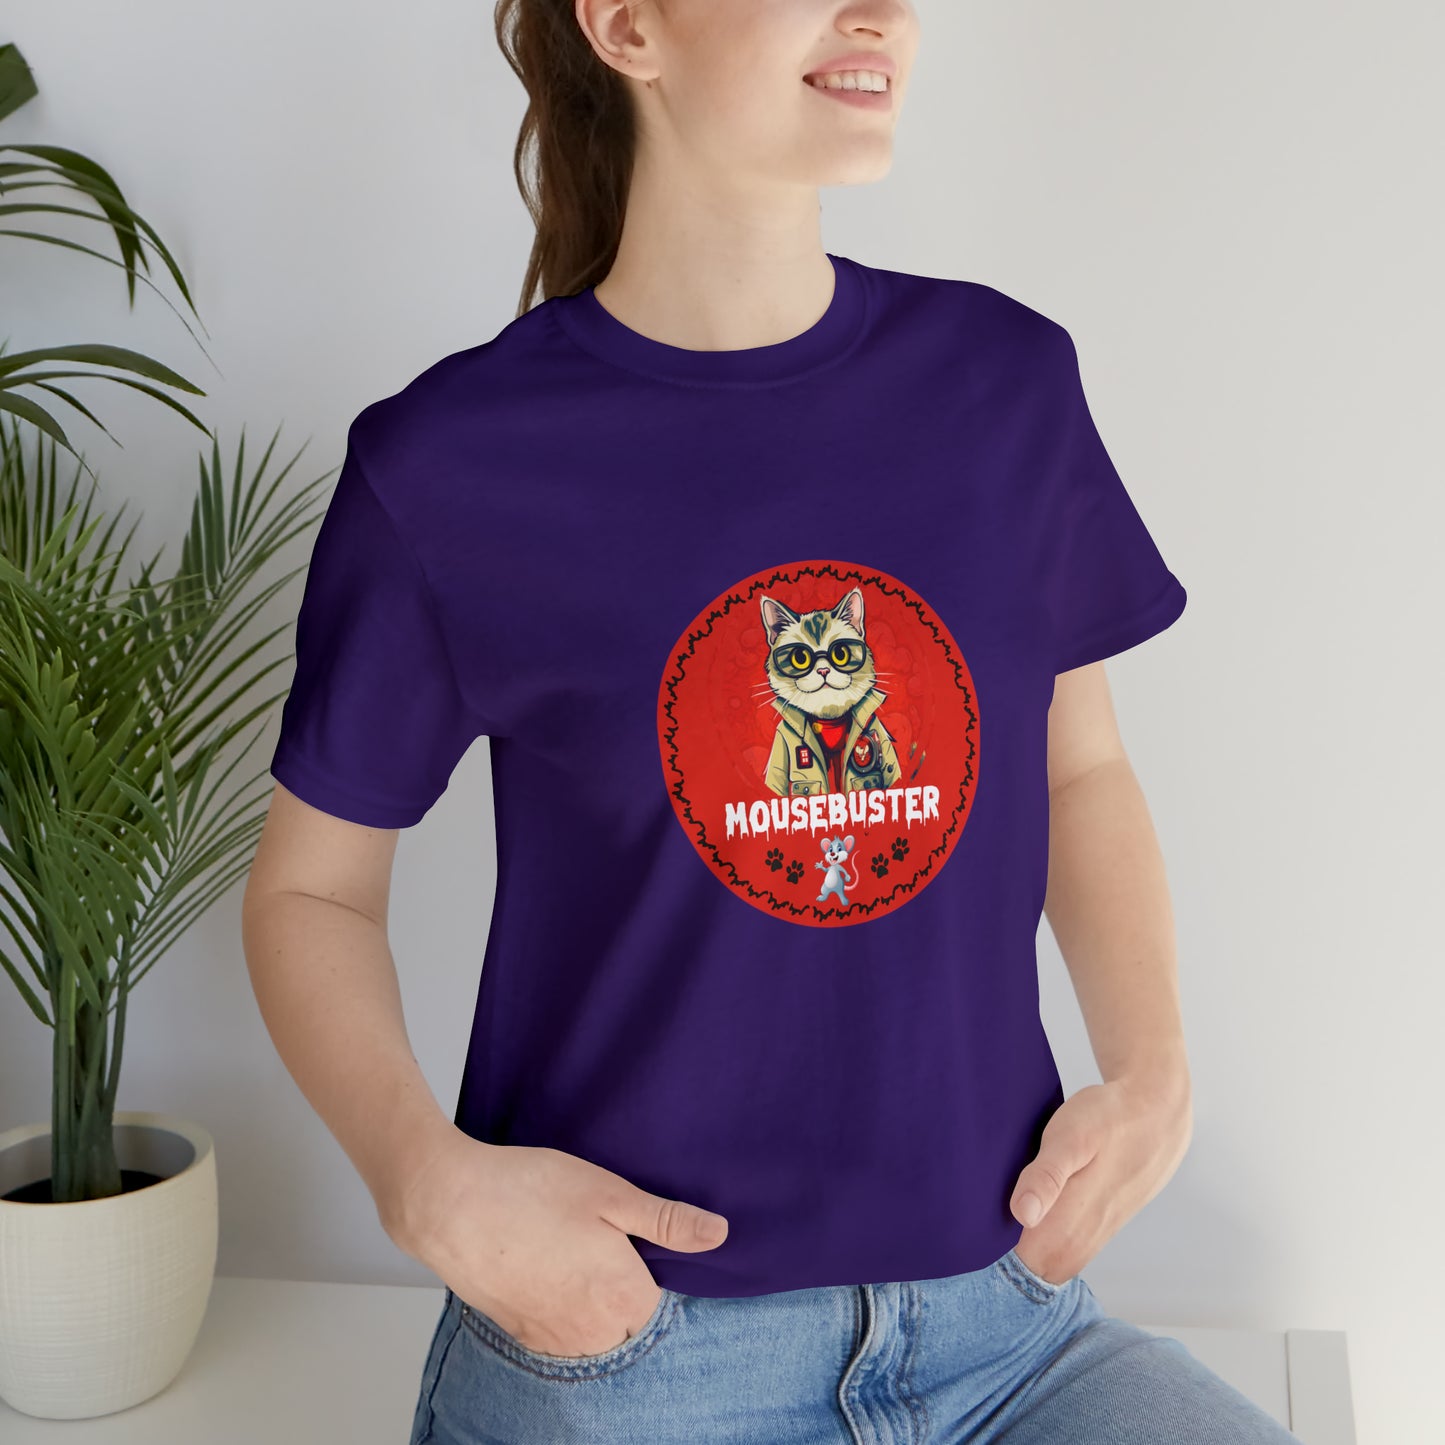 Animals, Cats, Mouse, Funny, Holiday, Halloween - Adult, Regular Fit, Soft Cotton, T-shirt